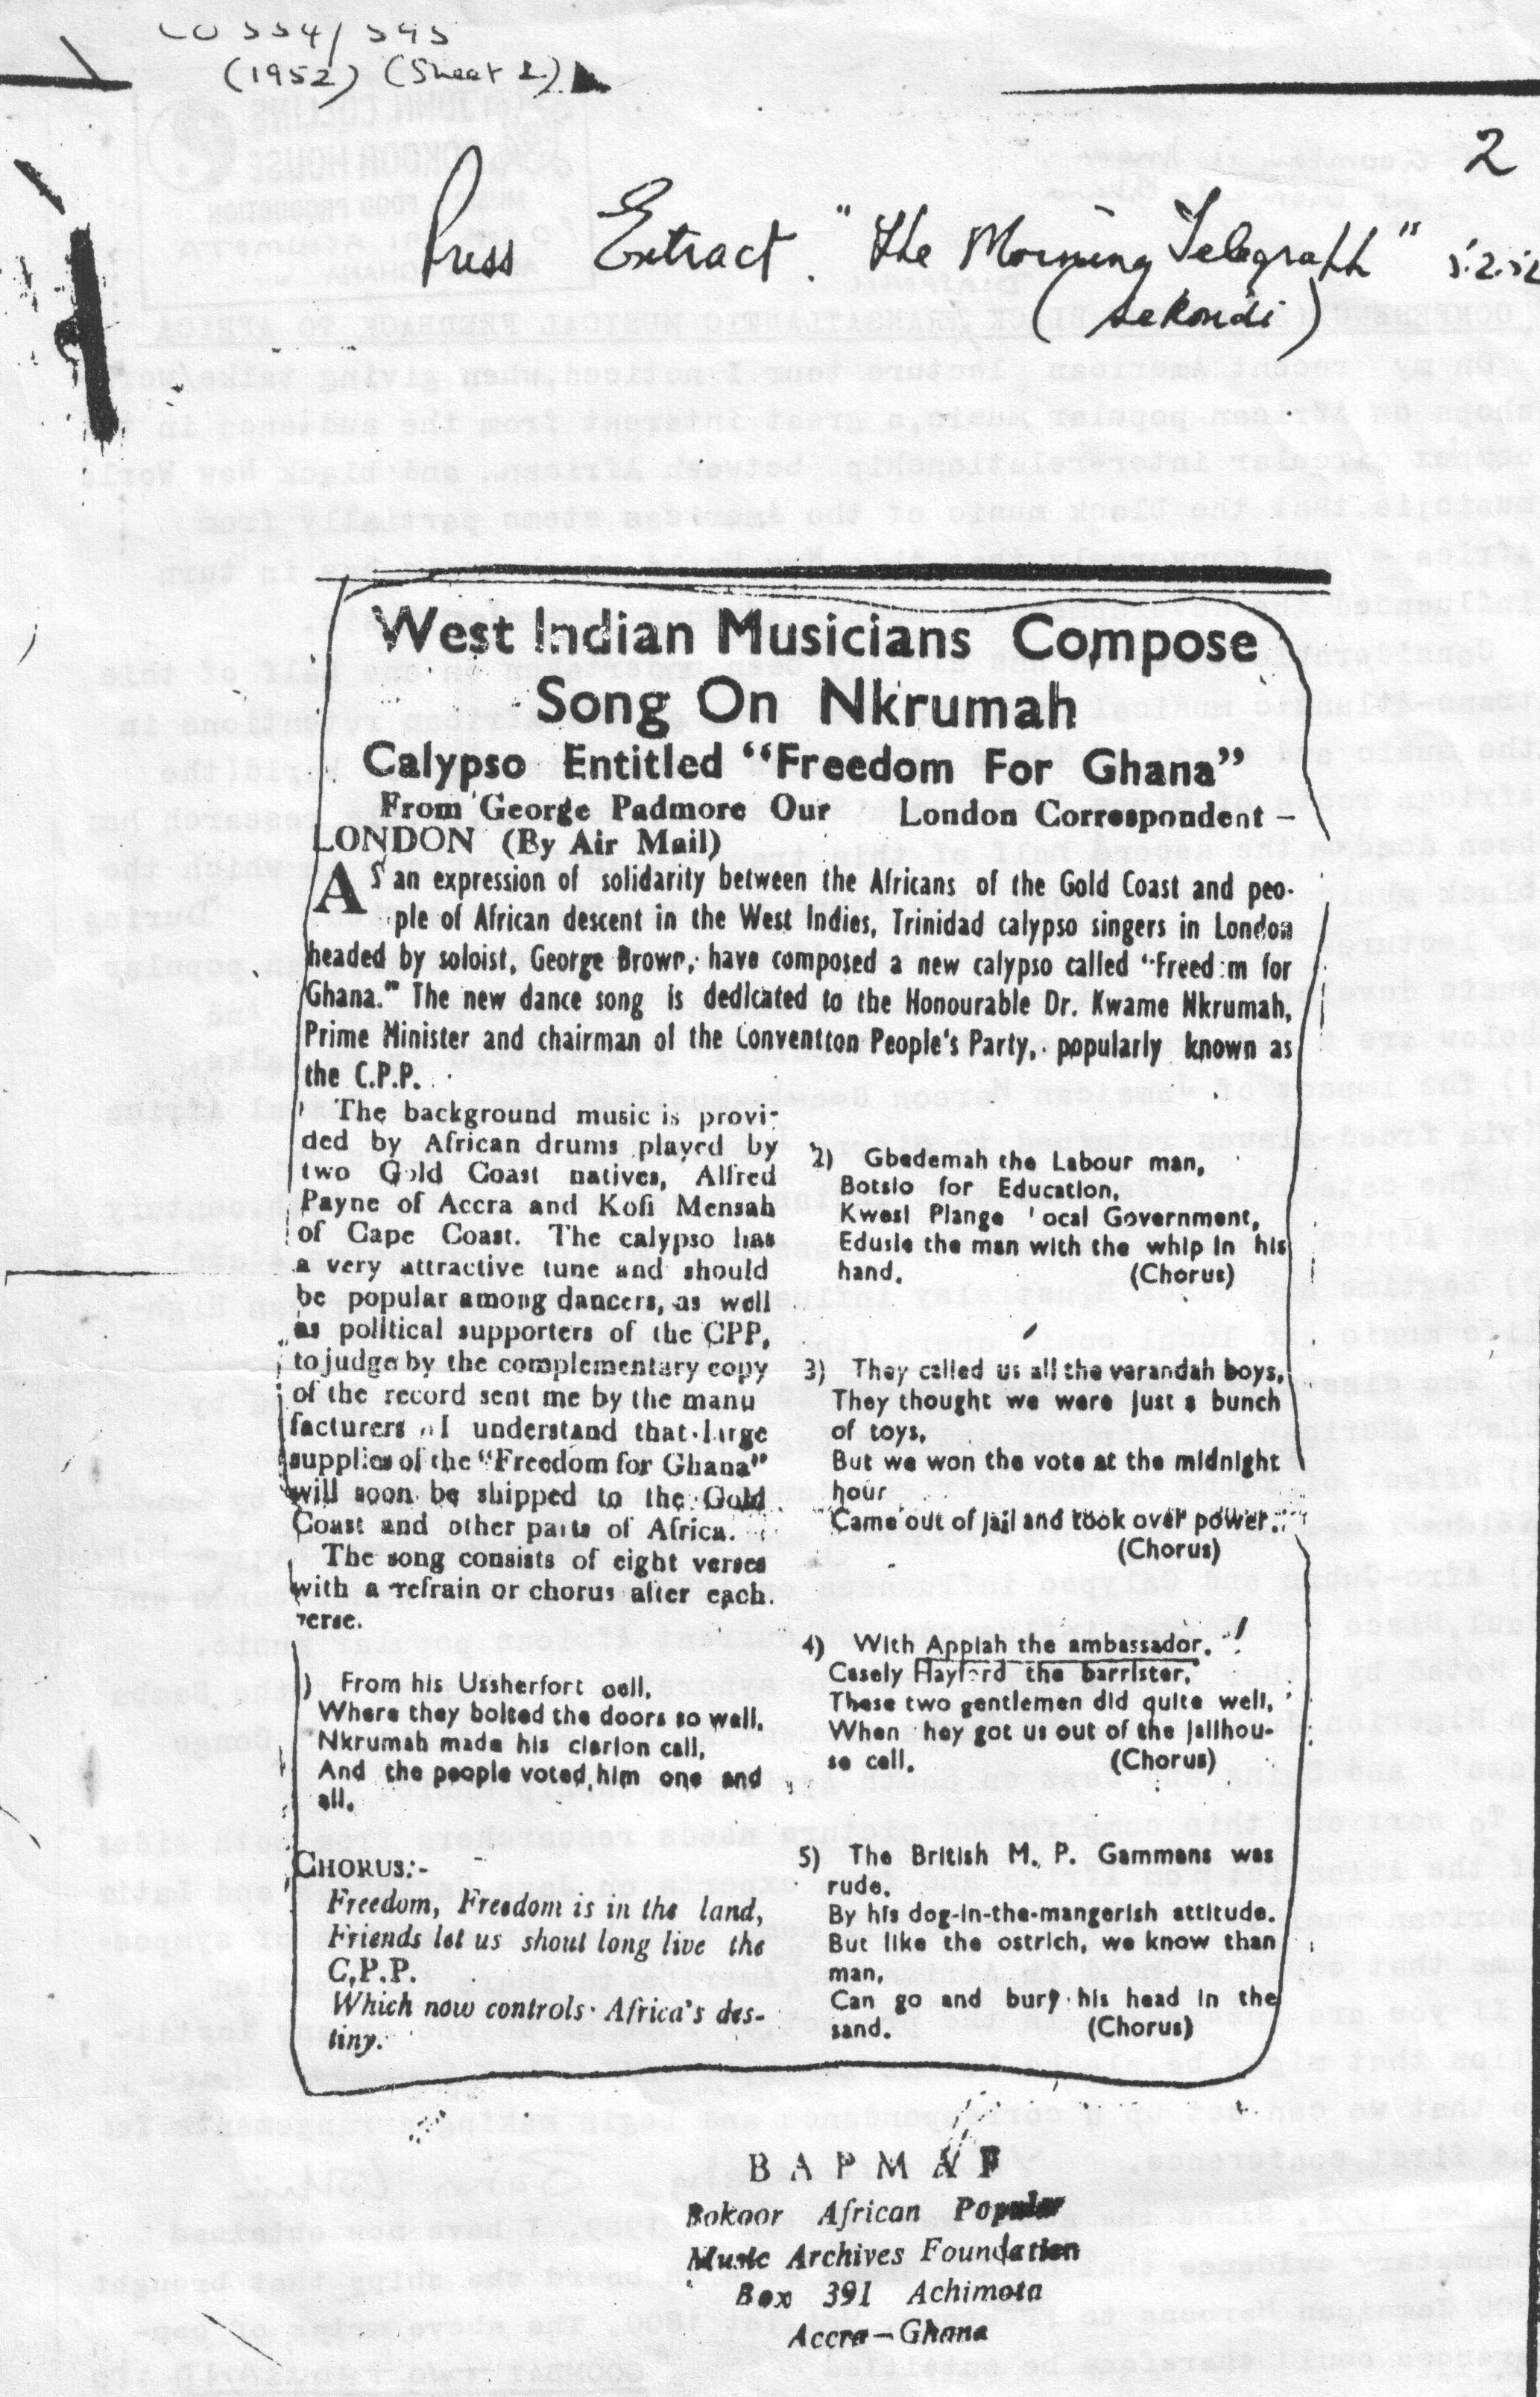 George Padmore article on George Browne's calypso "Freedom for Ghana" in the Ghanaian newspaper The Morning Telegraph (Sekondi) from February 5, 1952